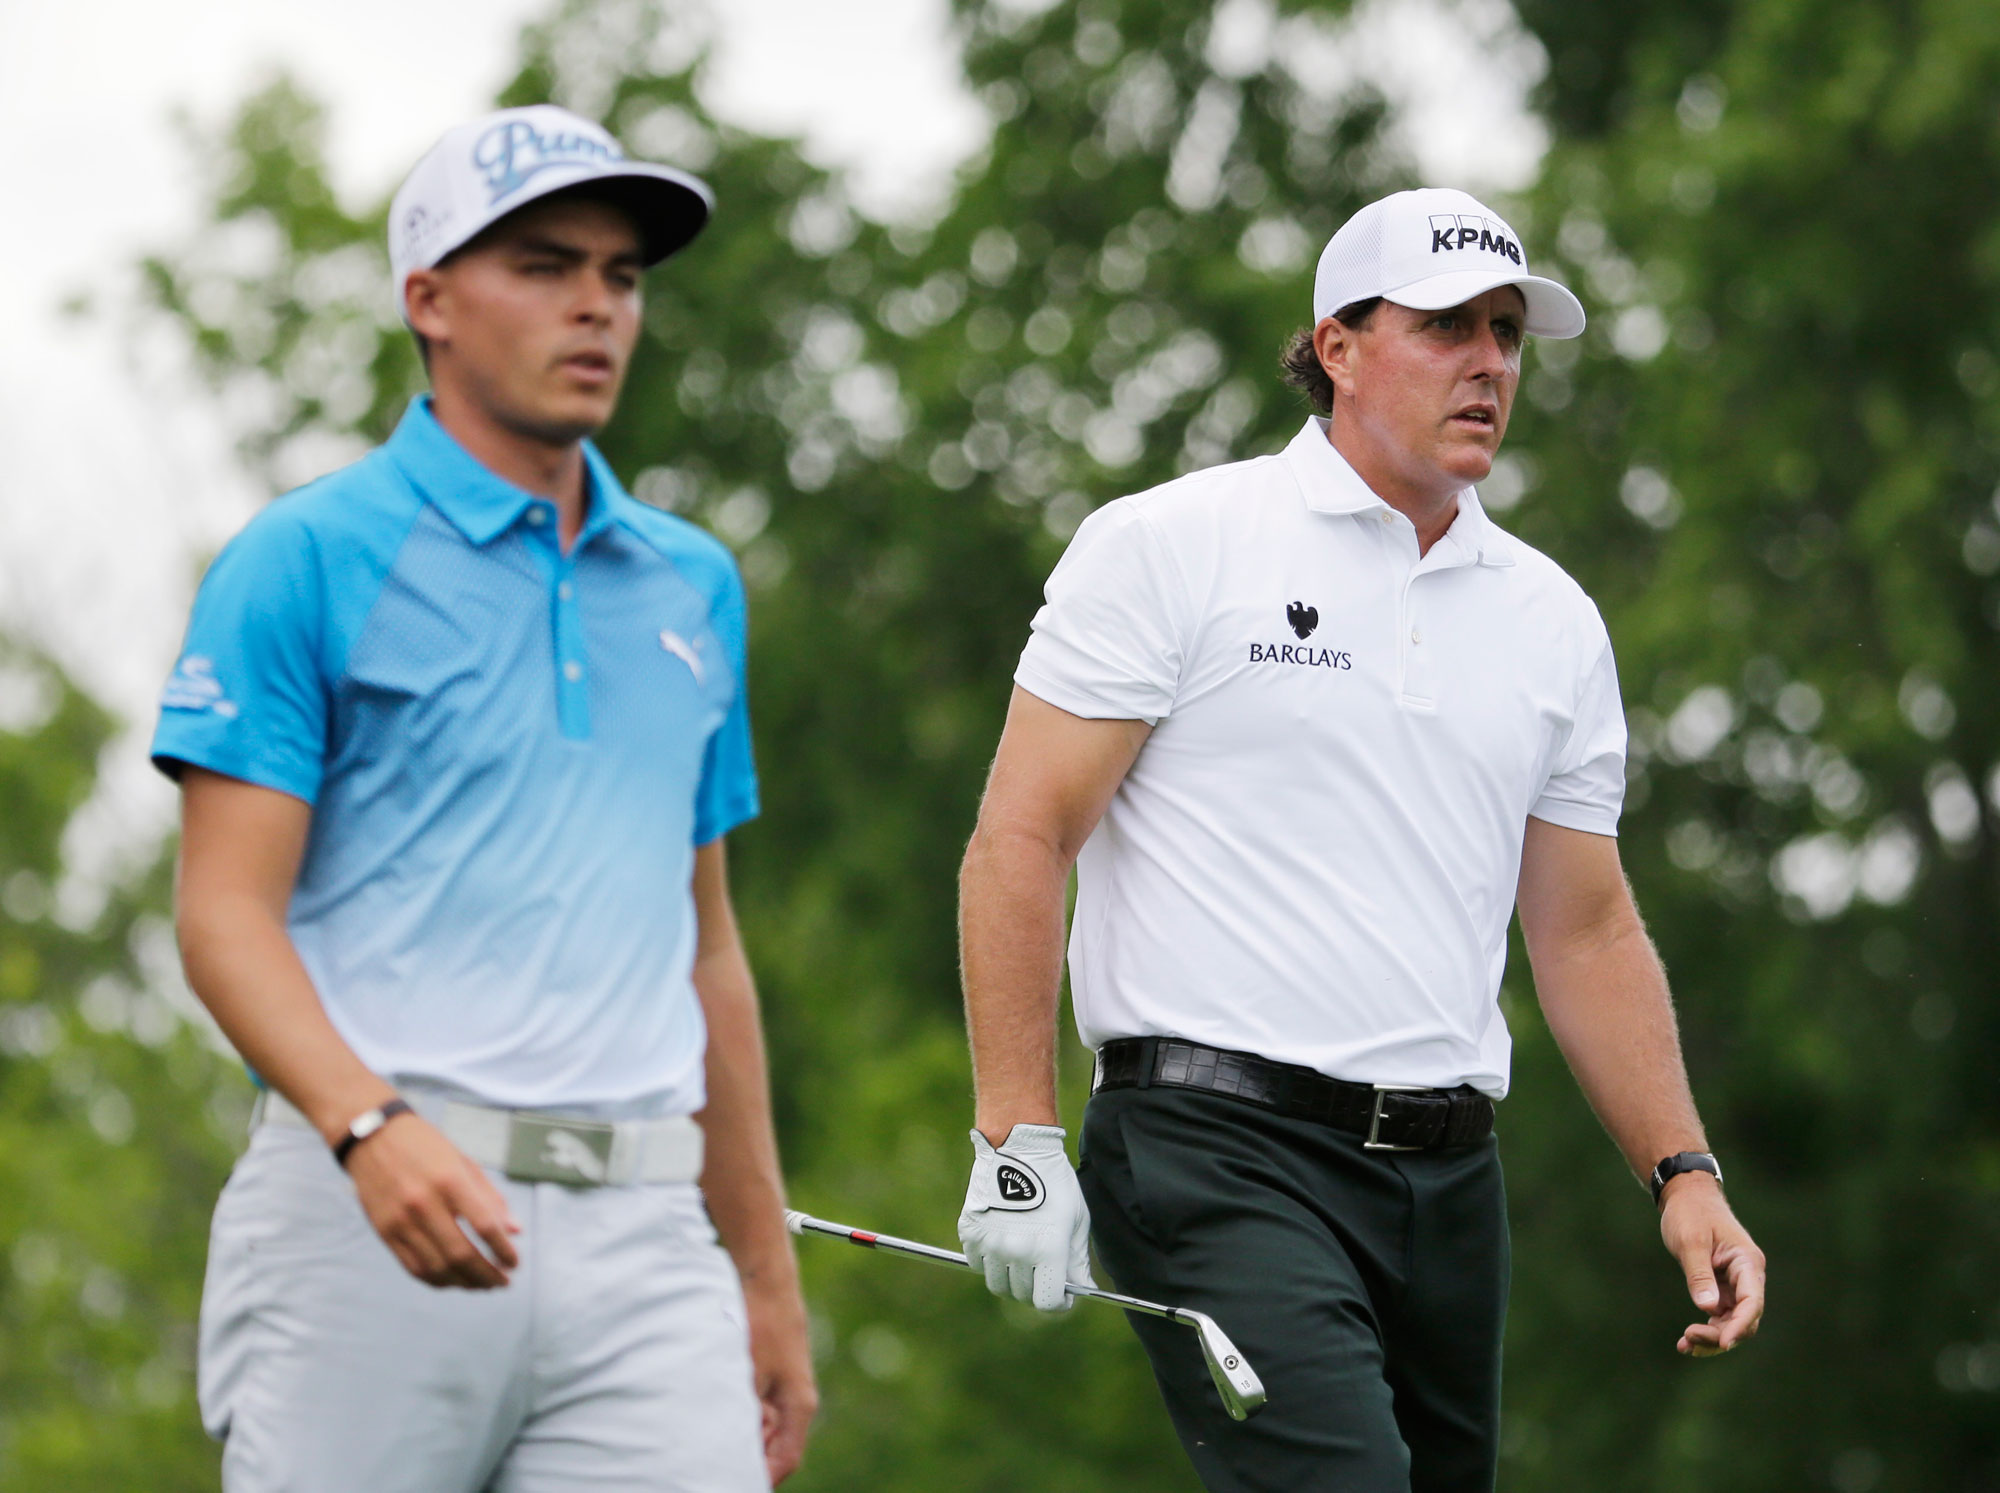 Rickie The Kid & Philly Mick: Both Ready For The Next Move Up?